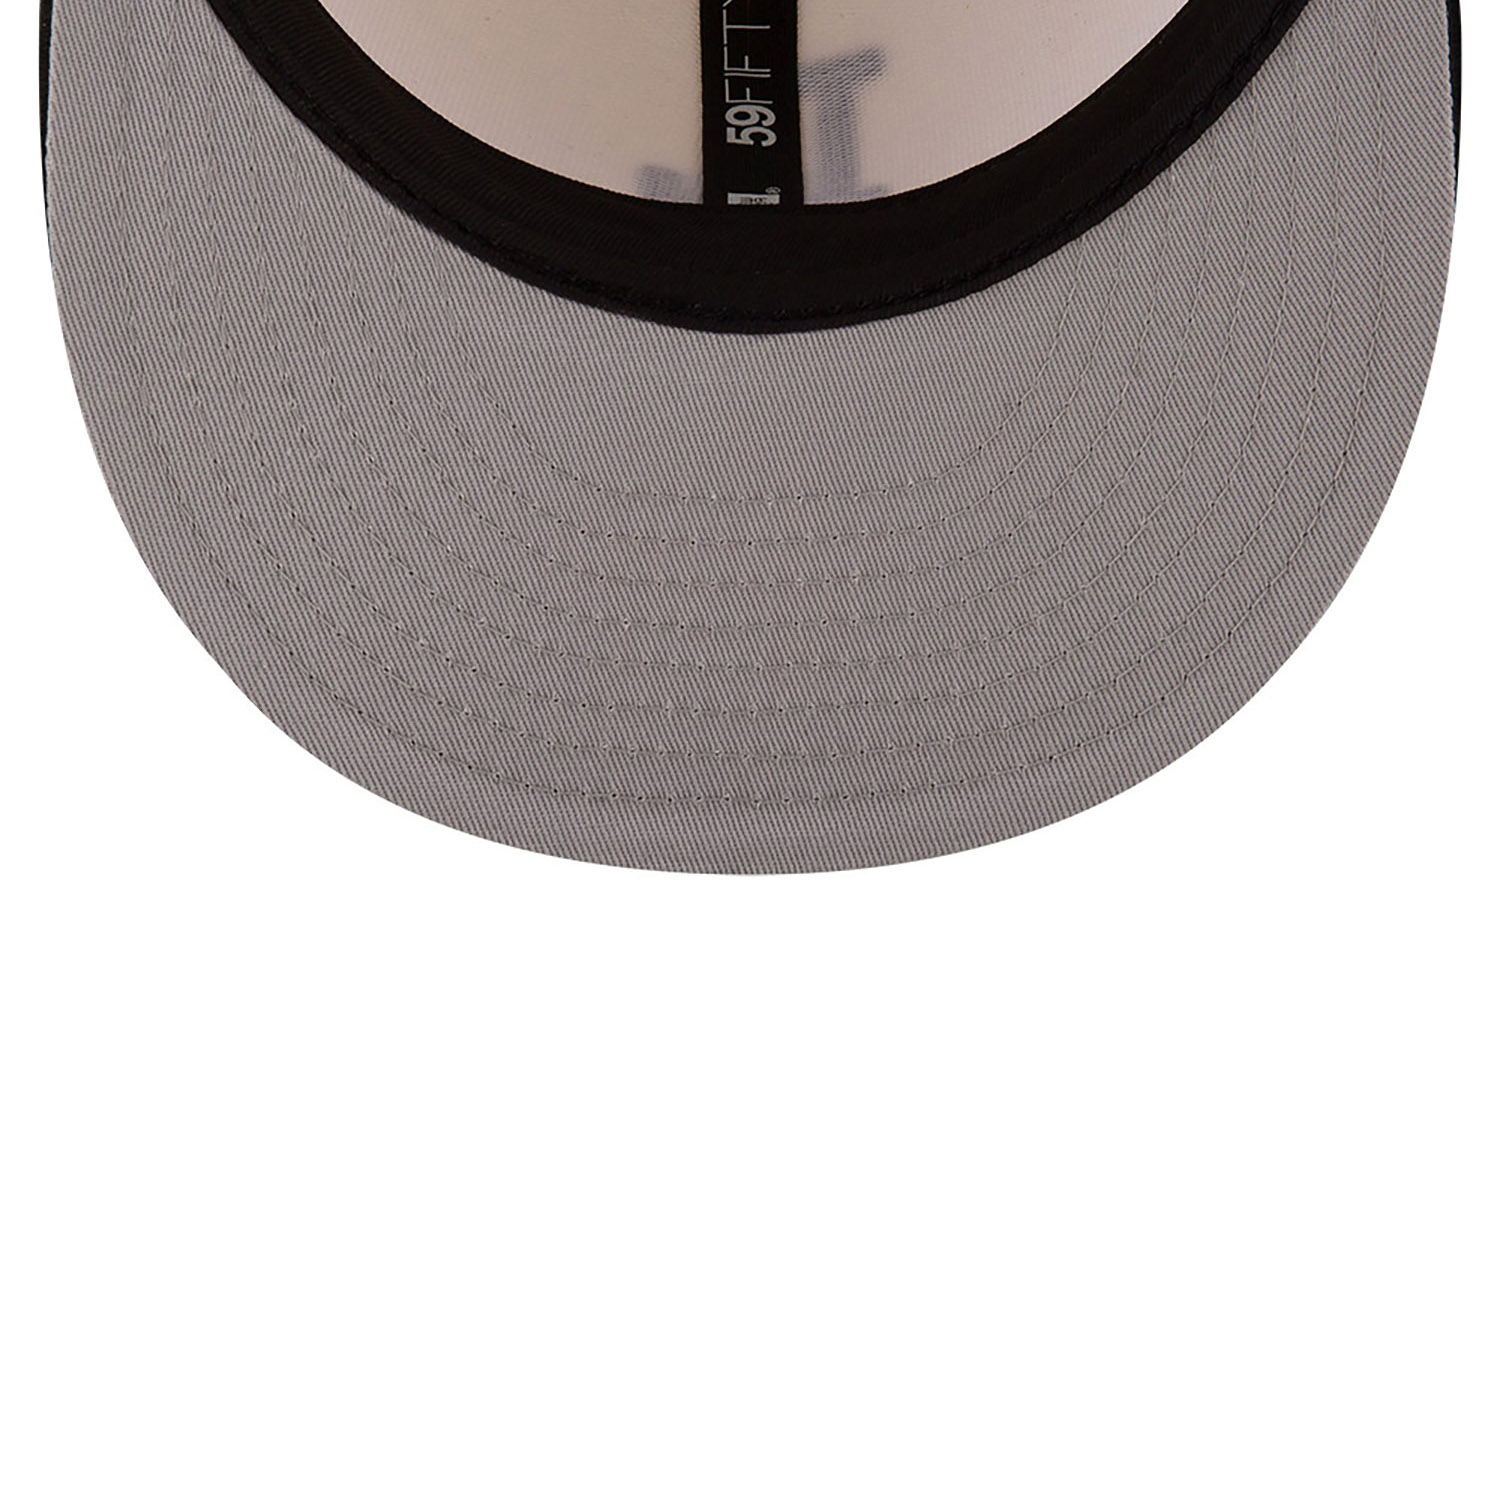 LA Dodgers Leather Visor Chrome White 59FIFTY Fitted Cap